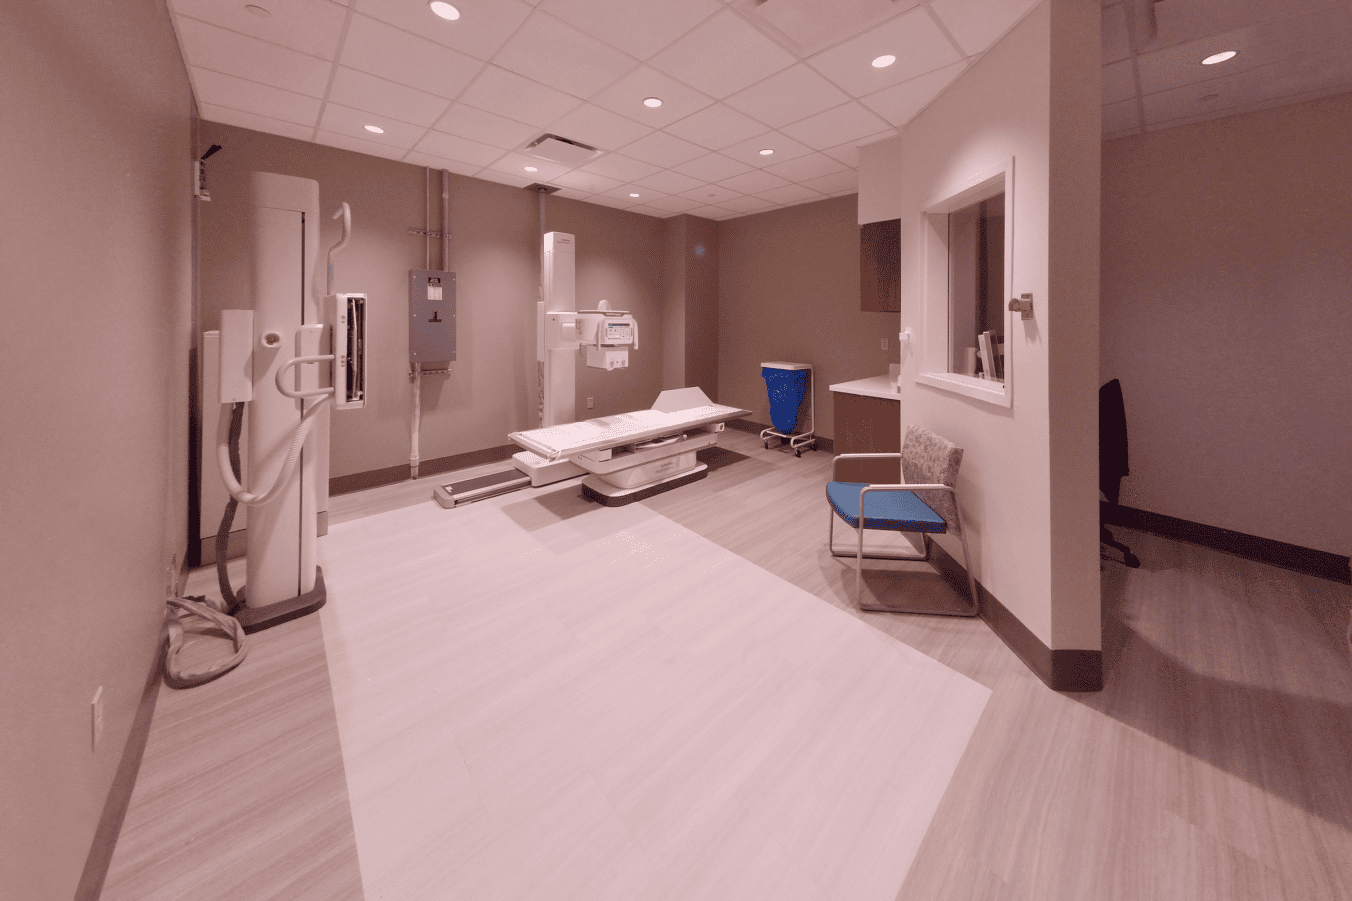 Room with x-ray machine and medical equipment